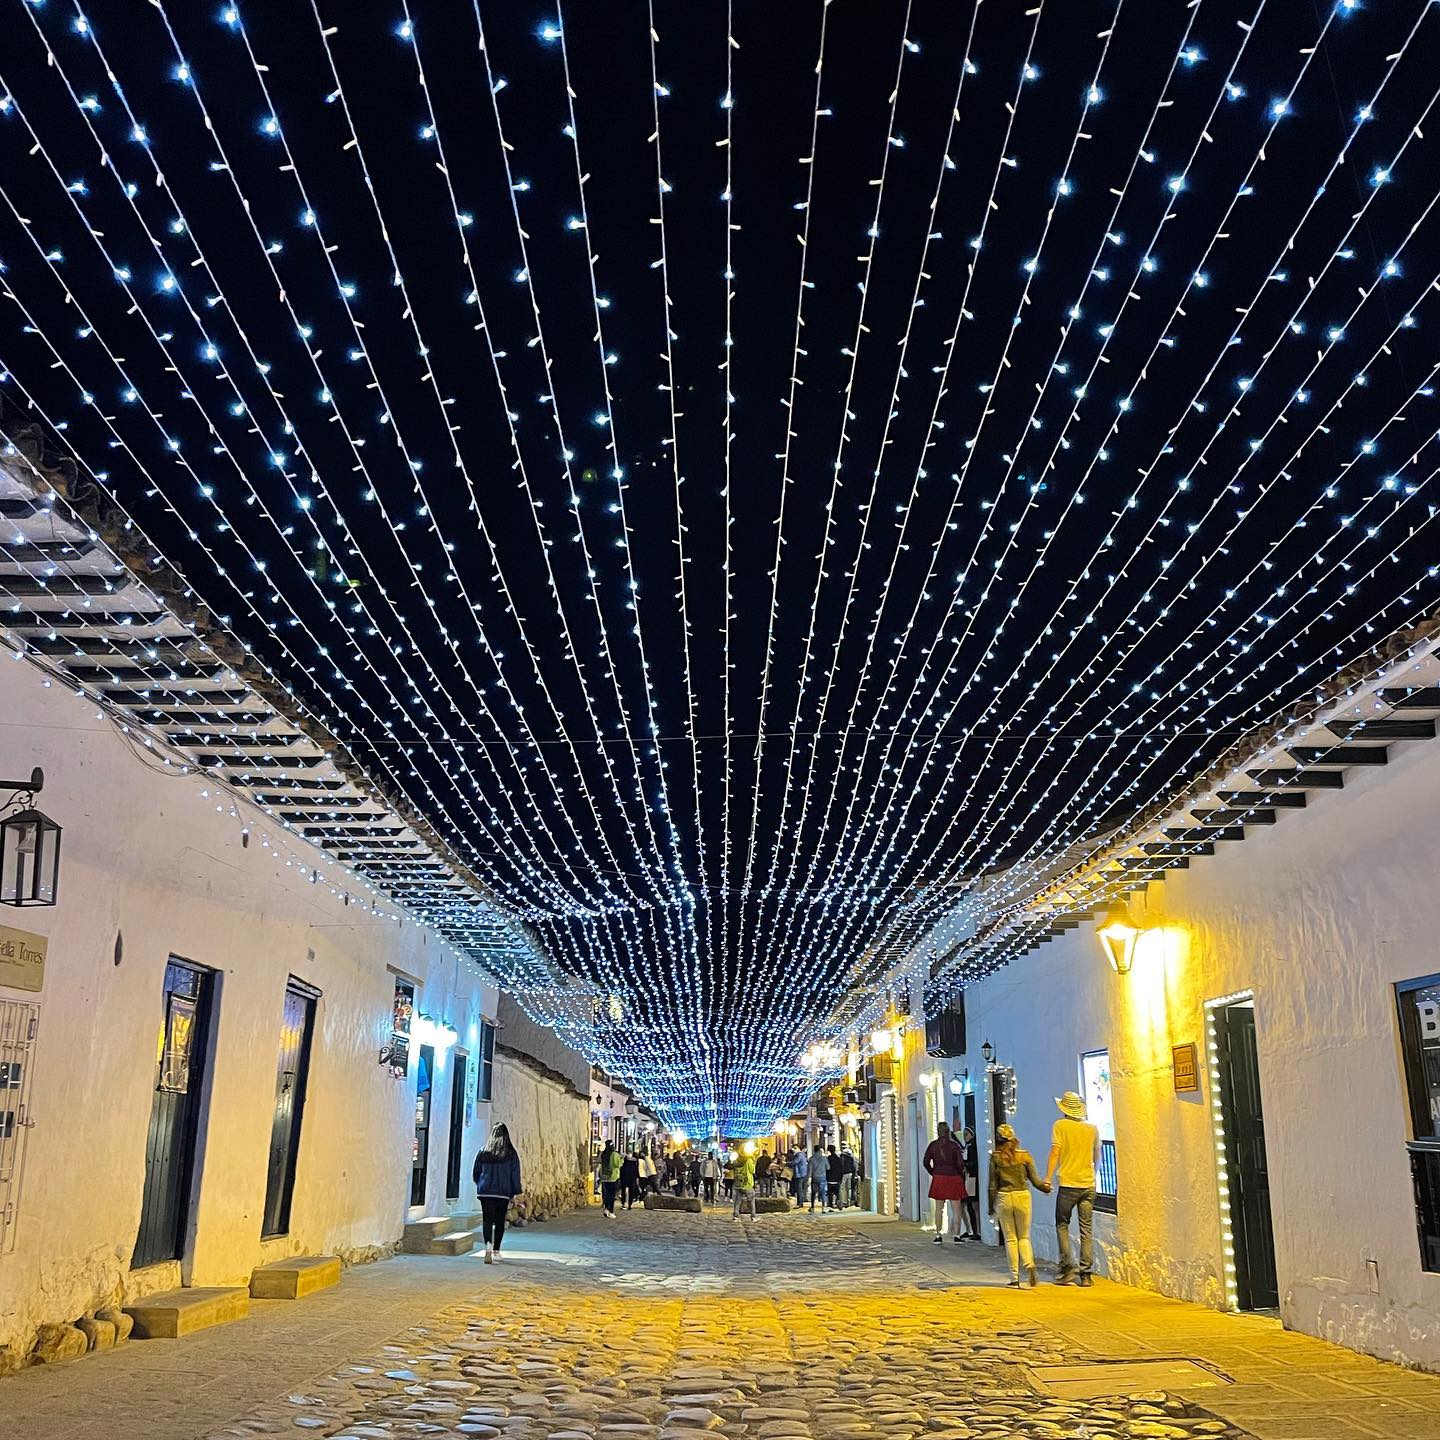 When you have the chance to visit Barichara and Villa de Leyva with Christmas time; do it! 🤩 I think the whole month of December is a special month in this kind of small villages. 
I took this picture in Villa de Leyva where I arrived December the 10th last year 🥰 But also Barichara is a very very beautiful village. For me the most beautiful village of Colombia 😍Especially with Christmas time! 

Have you been in Barichara or Villa de Leyva before? 

#colombiatravel #wereldreis #villadeleyvamagica #villadeleyva #visitcolombia #travelingthroughtheworld #christmastimeishere #backpacking #centralamericatrip #baricharacolombia #reistips #reisefieber #reisverslaafd #colombia_greatshots #colombia_folklore